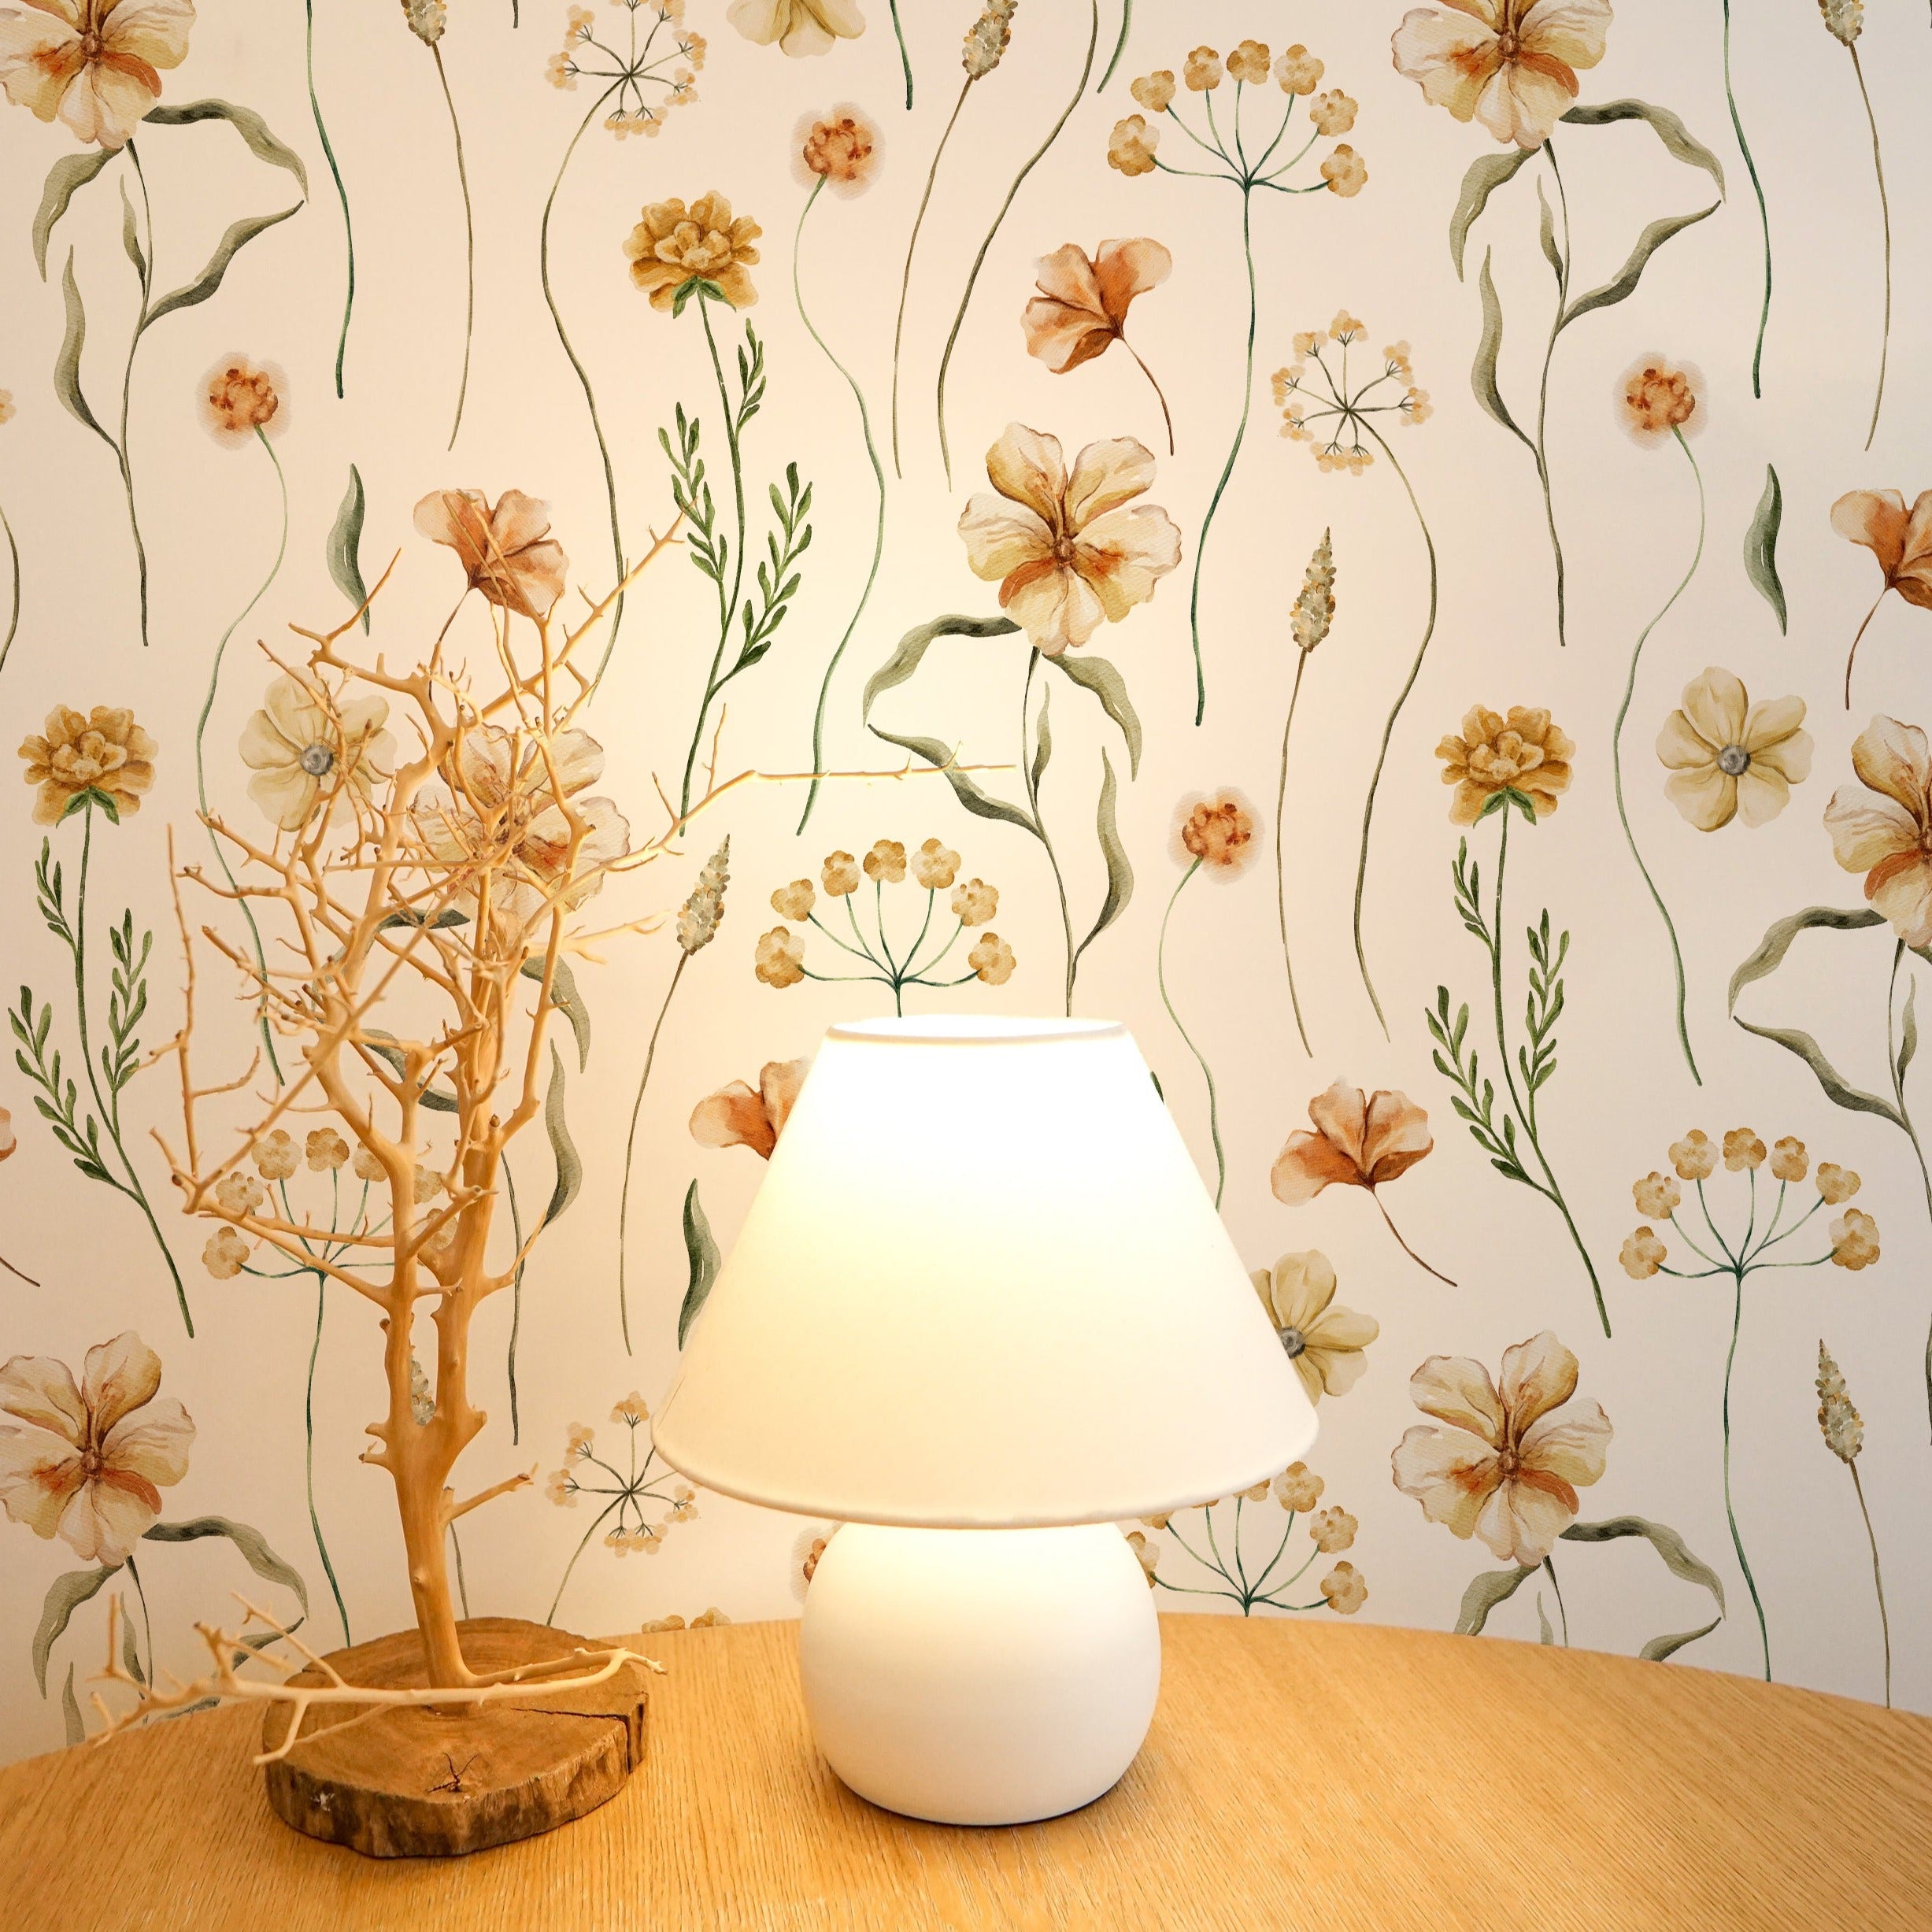 A serene bedside setup with the Warm Glow Floral Wallpaper providing a tranquil background. A simple white lamp on a wooden nightstand complements the wallpaper’s floral motifs, creating a peaceful and relaxing bedroom ambiance